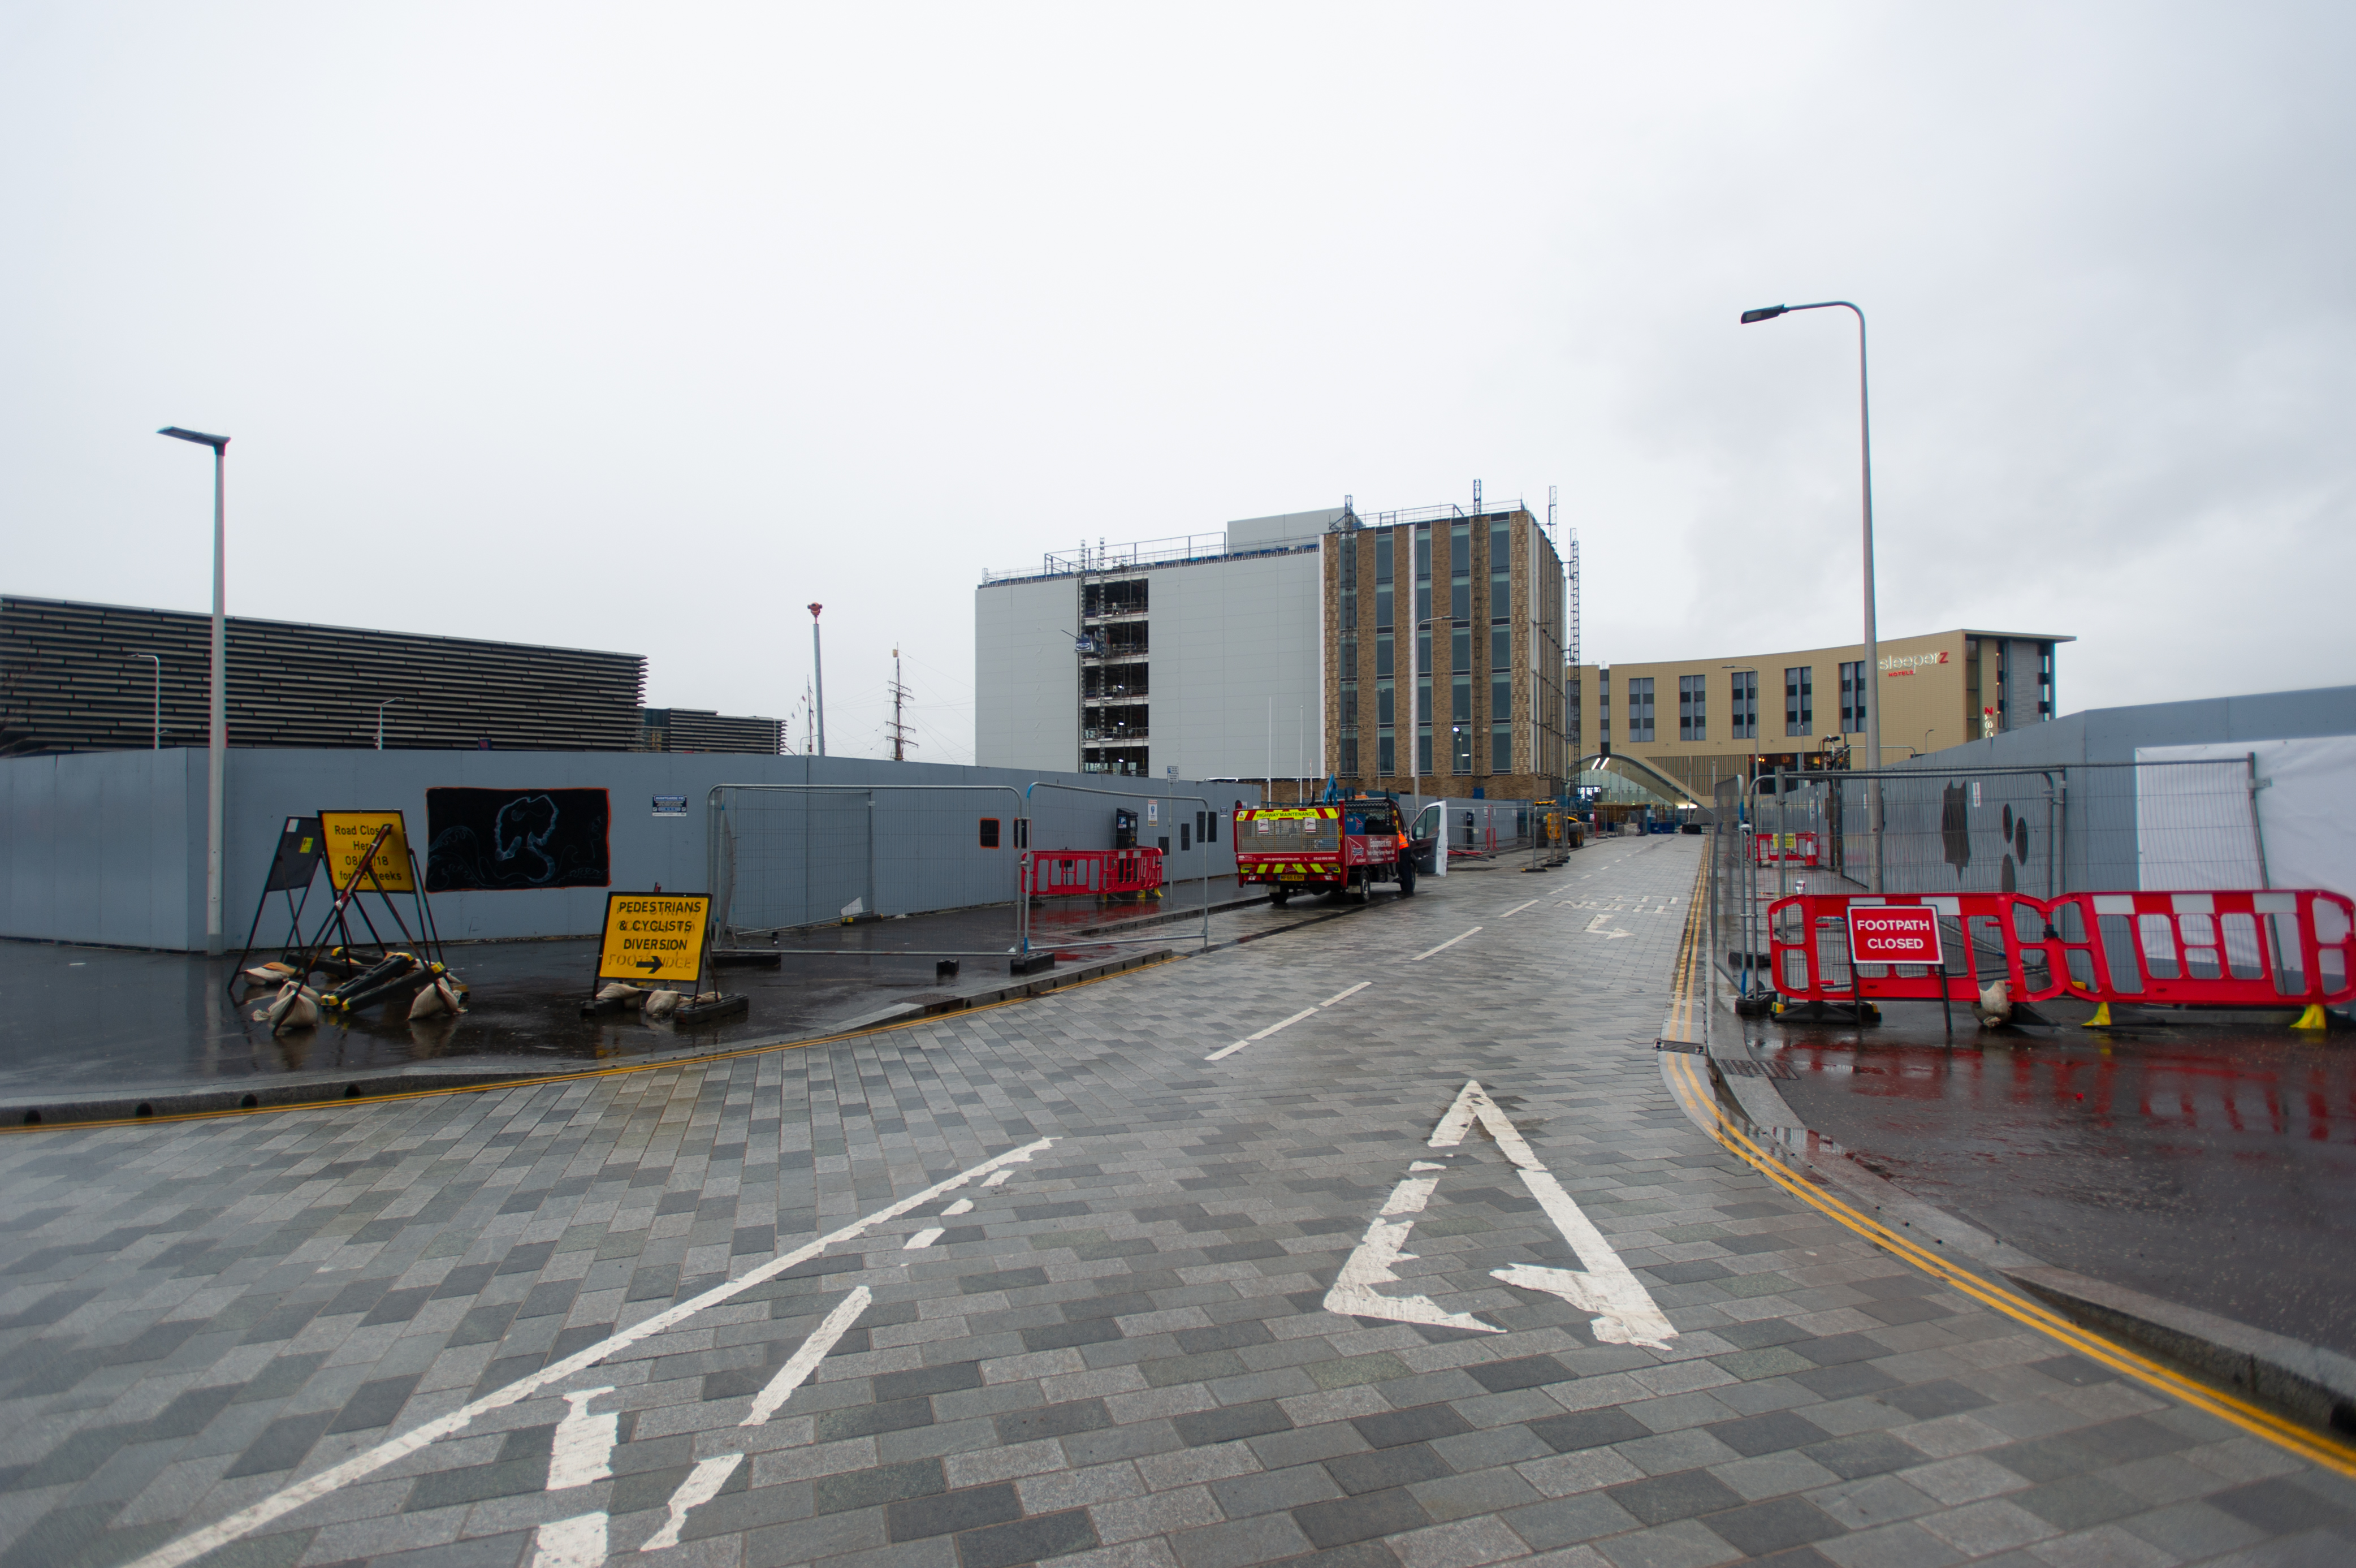 The new hotel will adjoin the office block already under construction on Site Six.